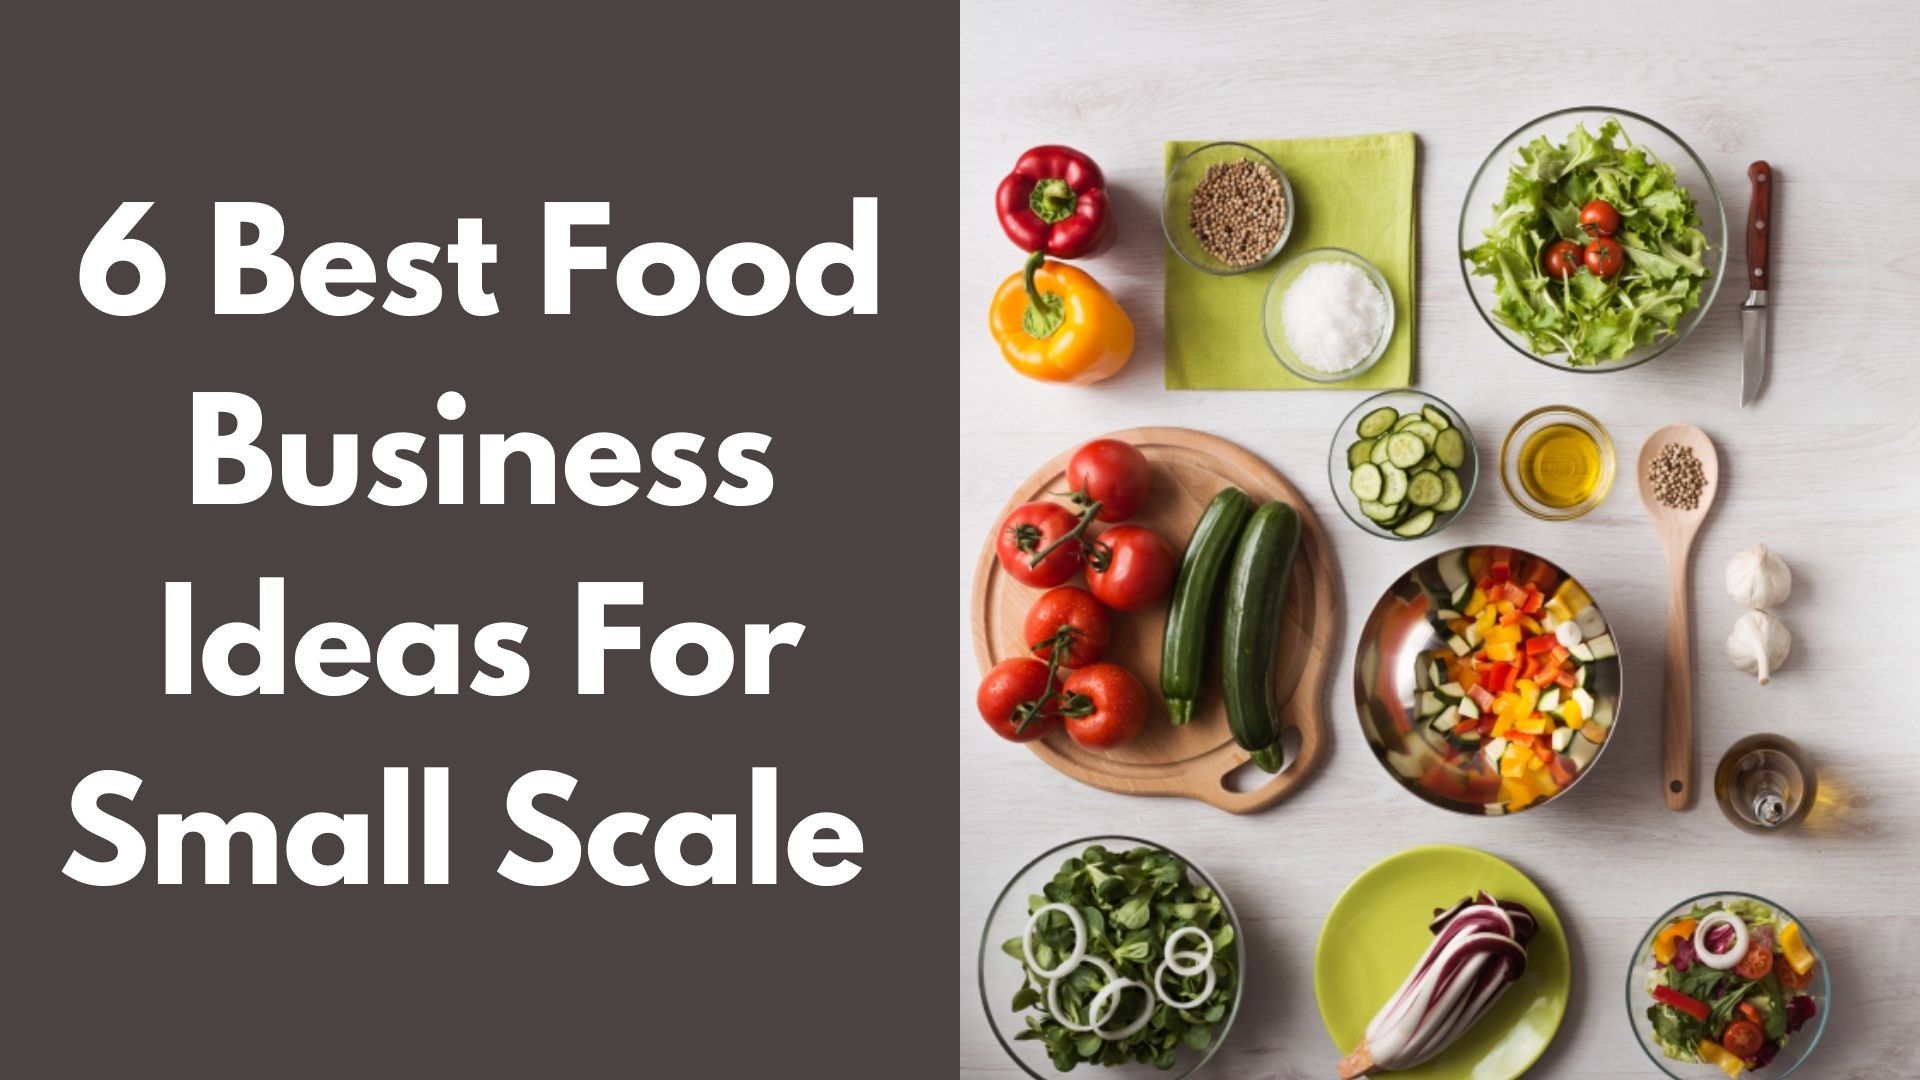 Top 6 best food business ideas for small scale